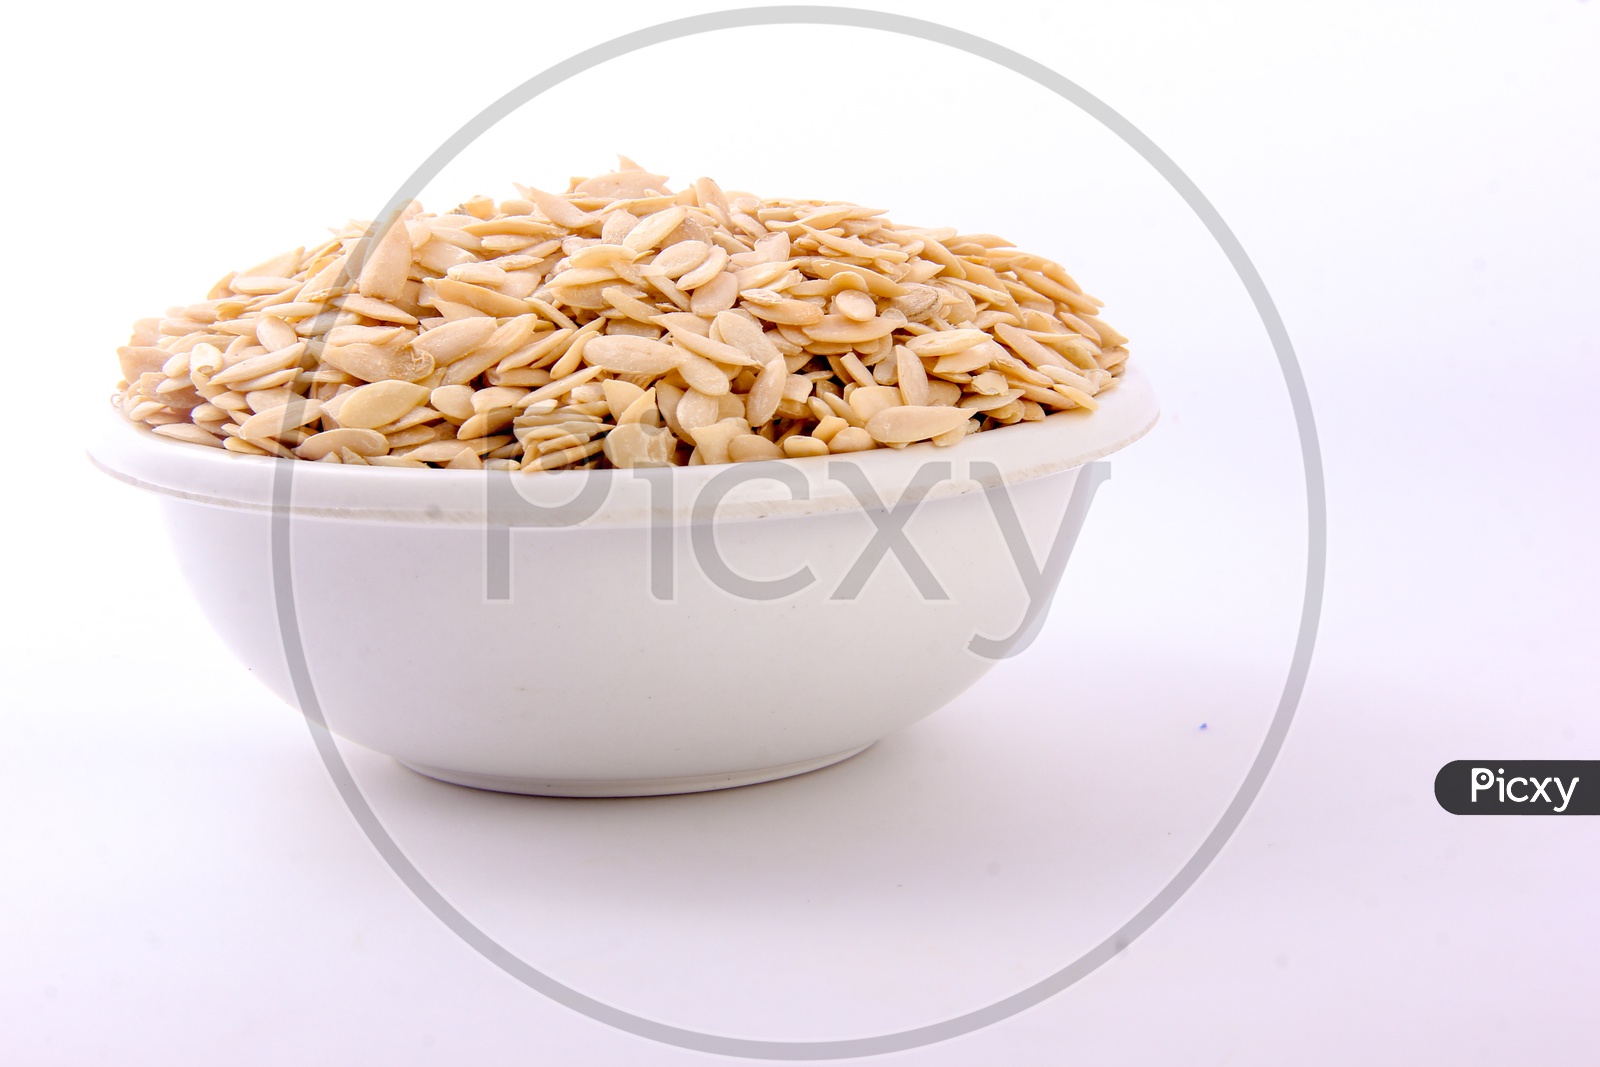 Dry Muskmelon Seeds in a Bowl on an Isolated White Background